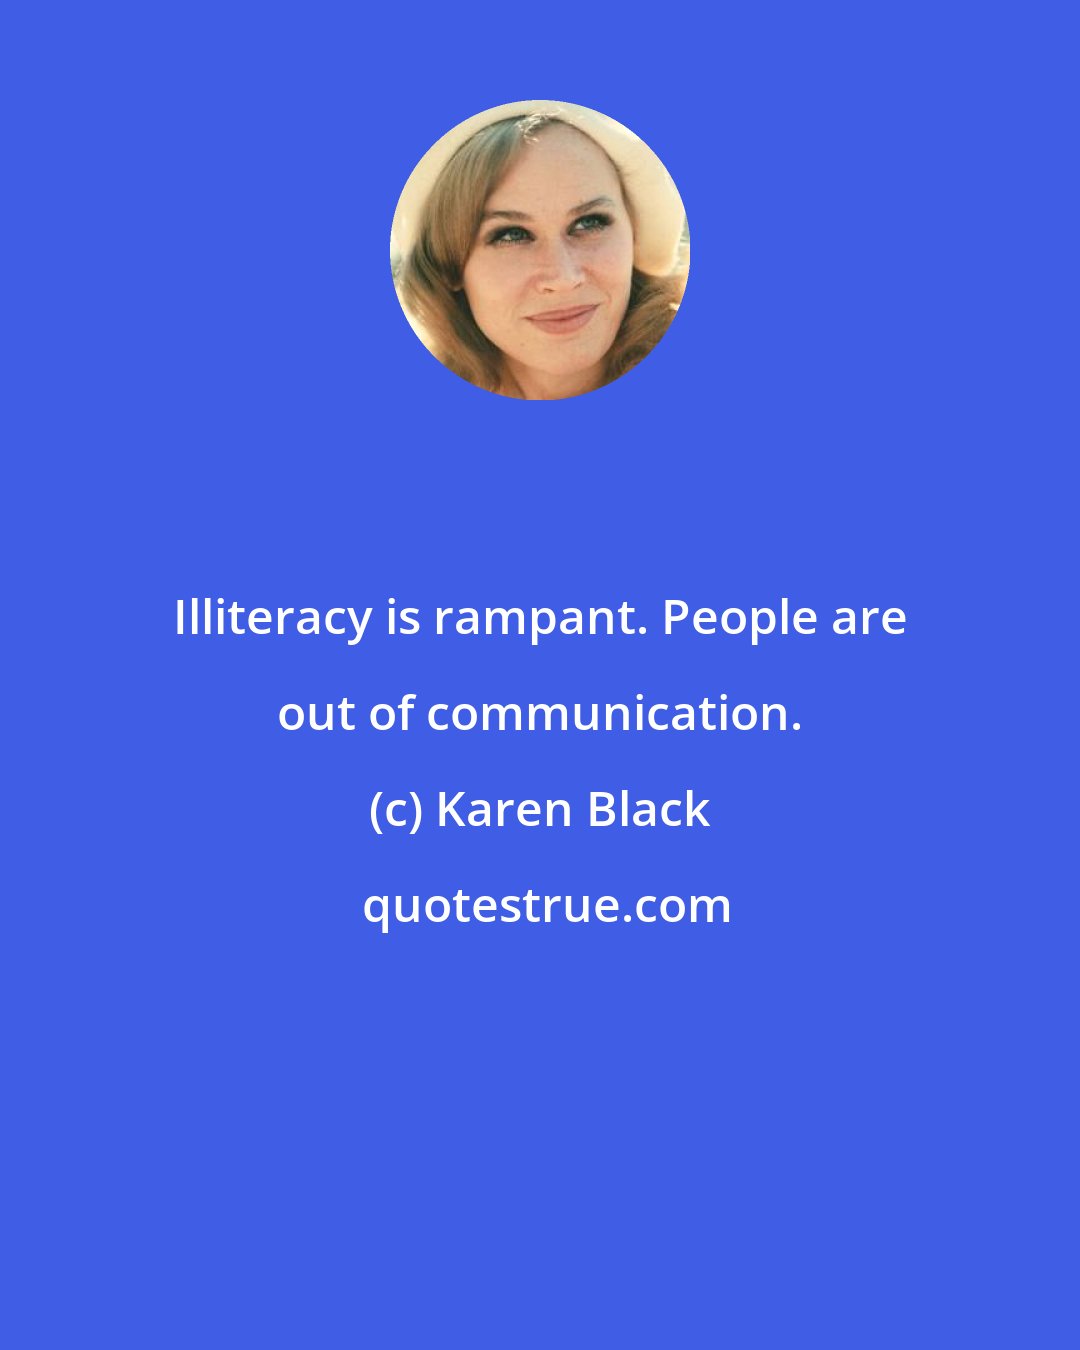 Karen Black: Illiteracy is rampant. People are out of communication.